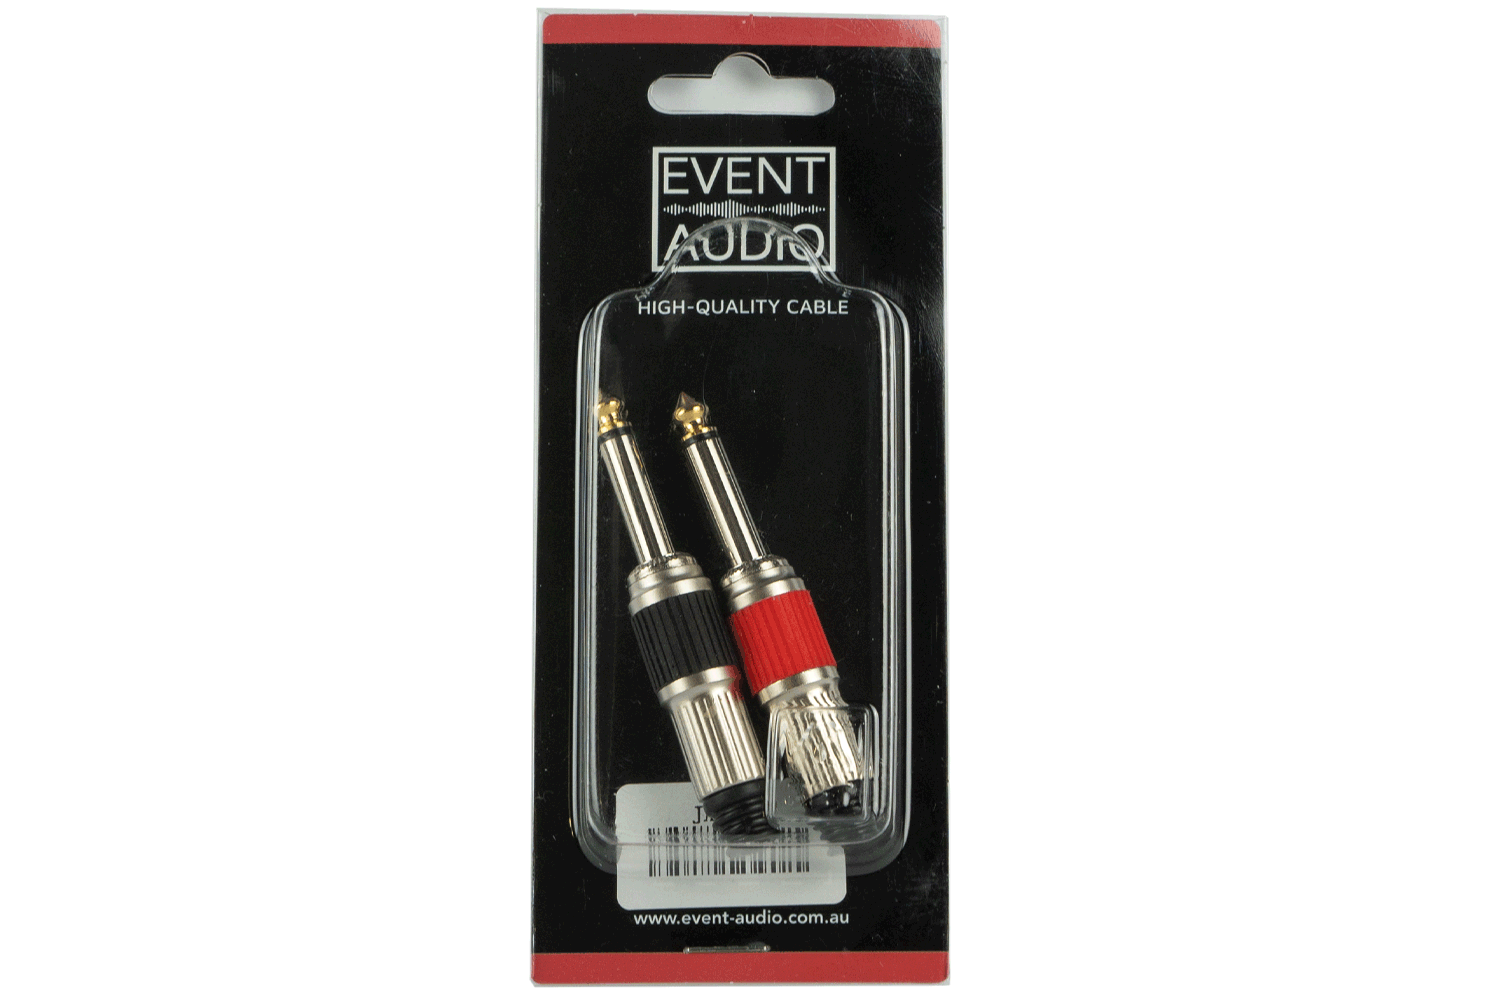 Event Audio JACKTS - Pair of Jack TS Male Plugs packaging